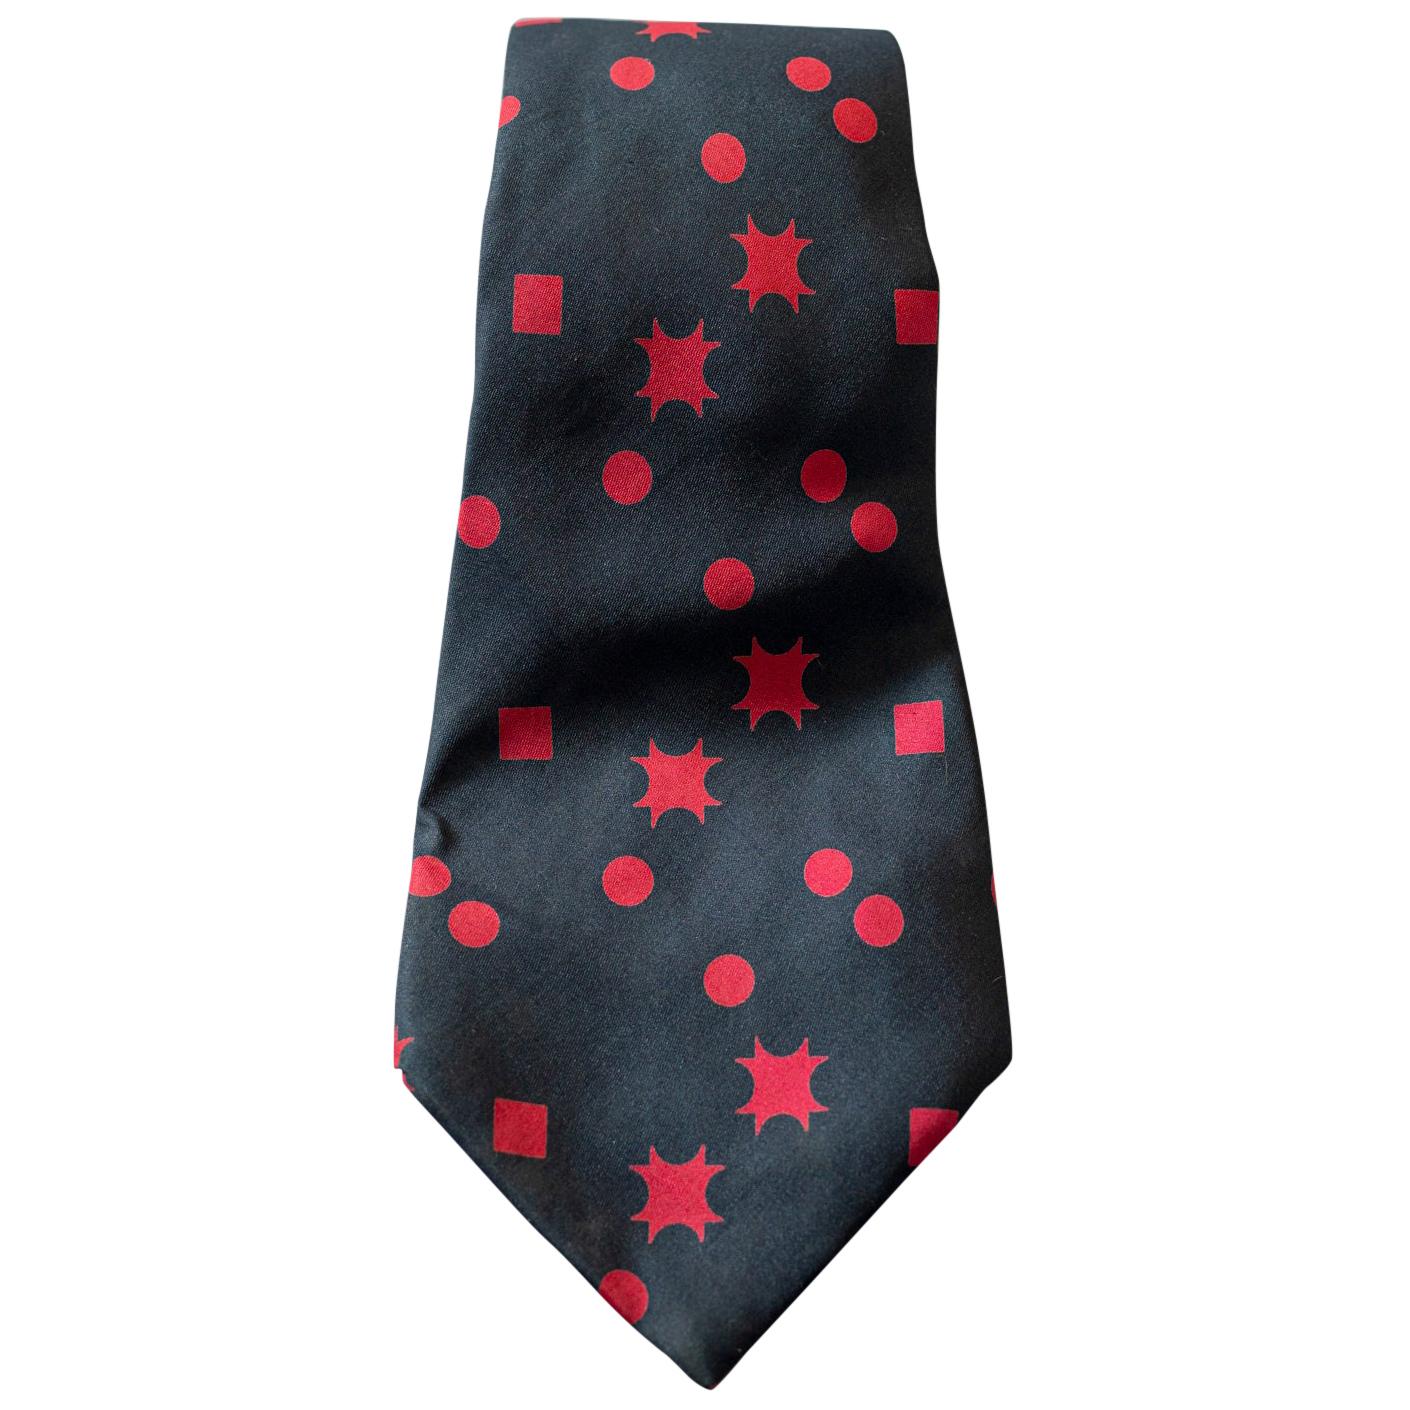 Vintage Piere D'Albye all-silk tie with small red geometric shapes